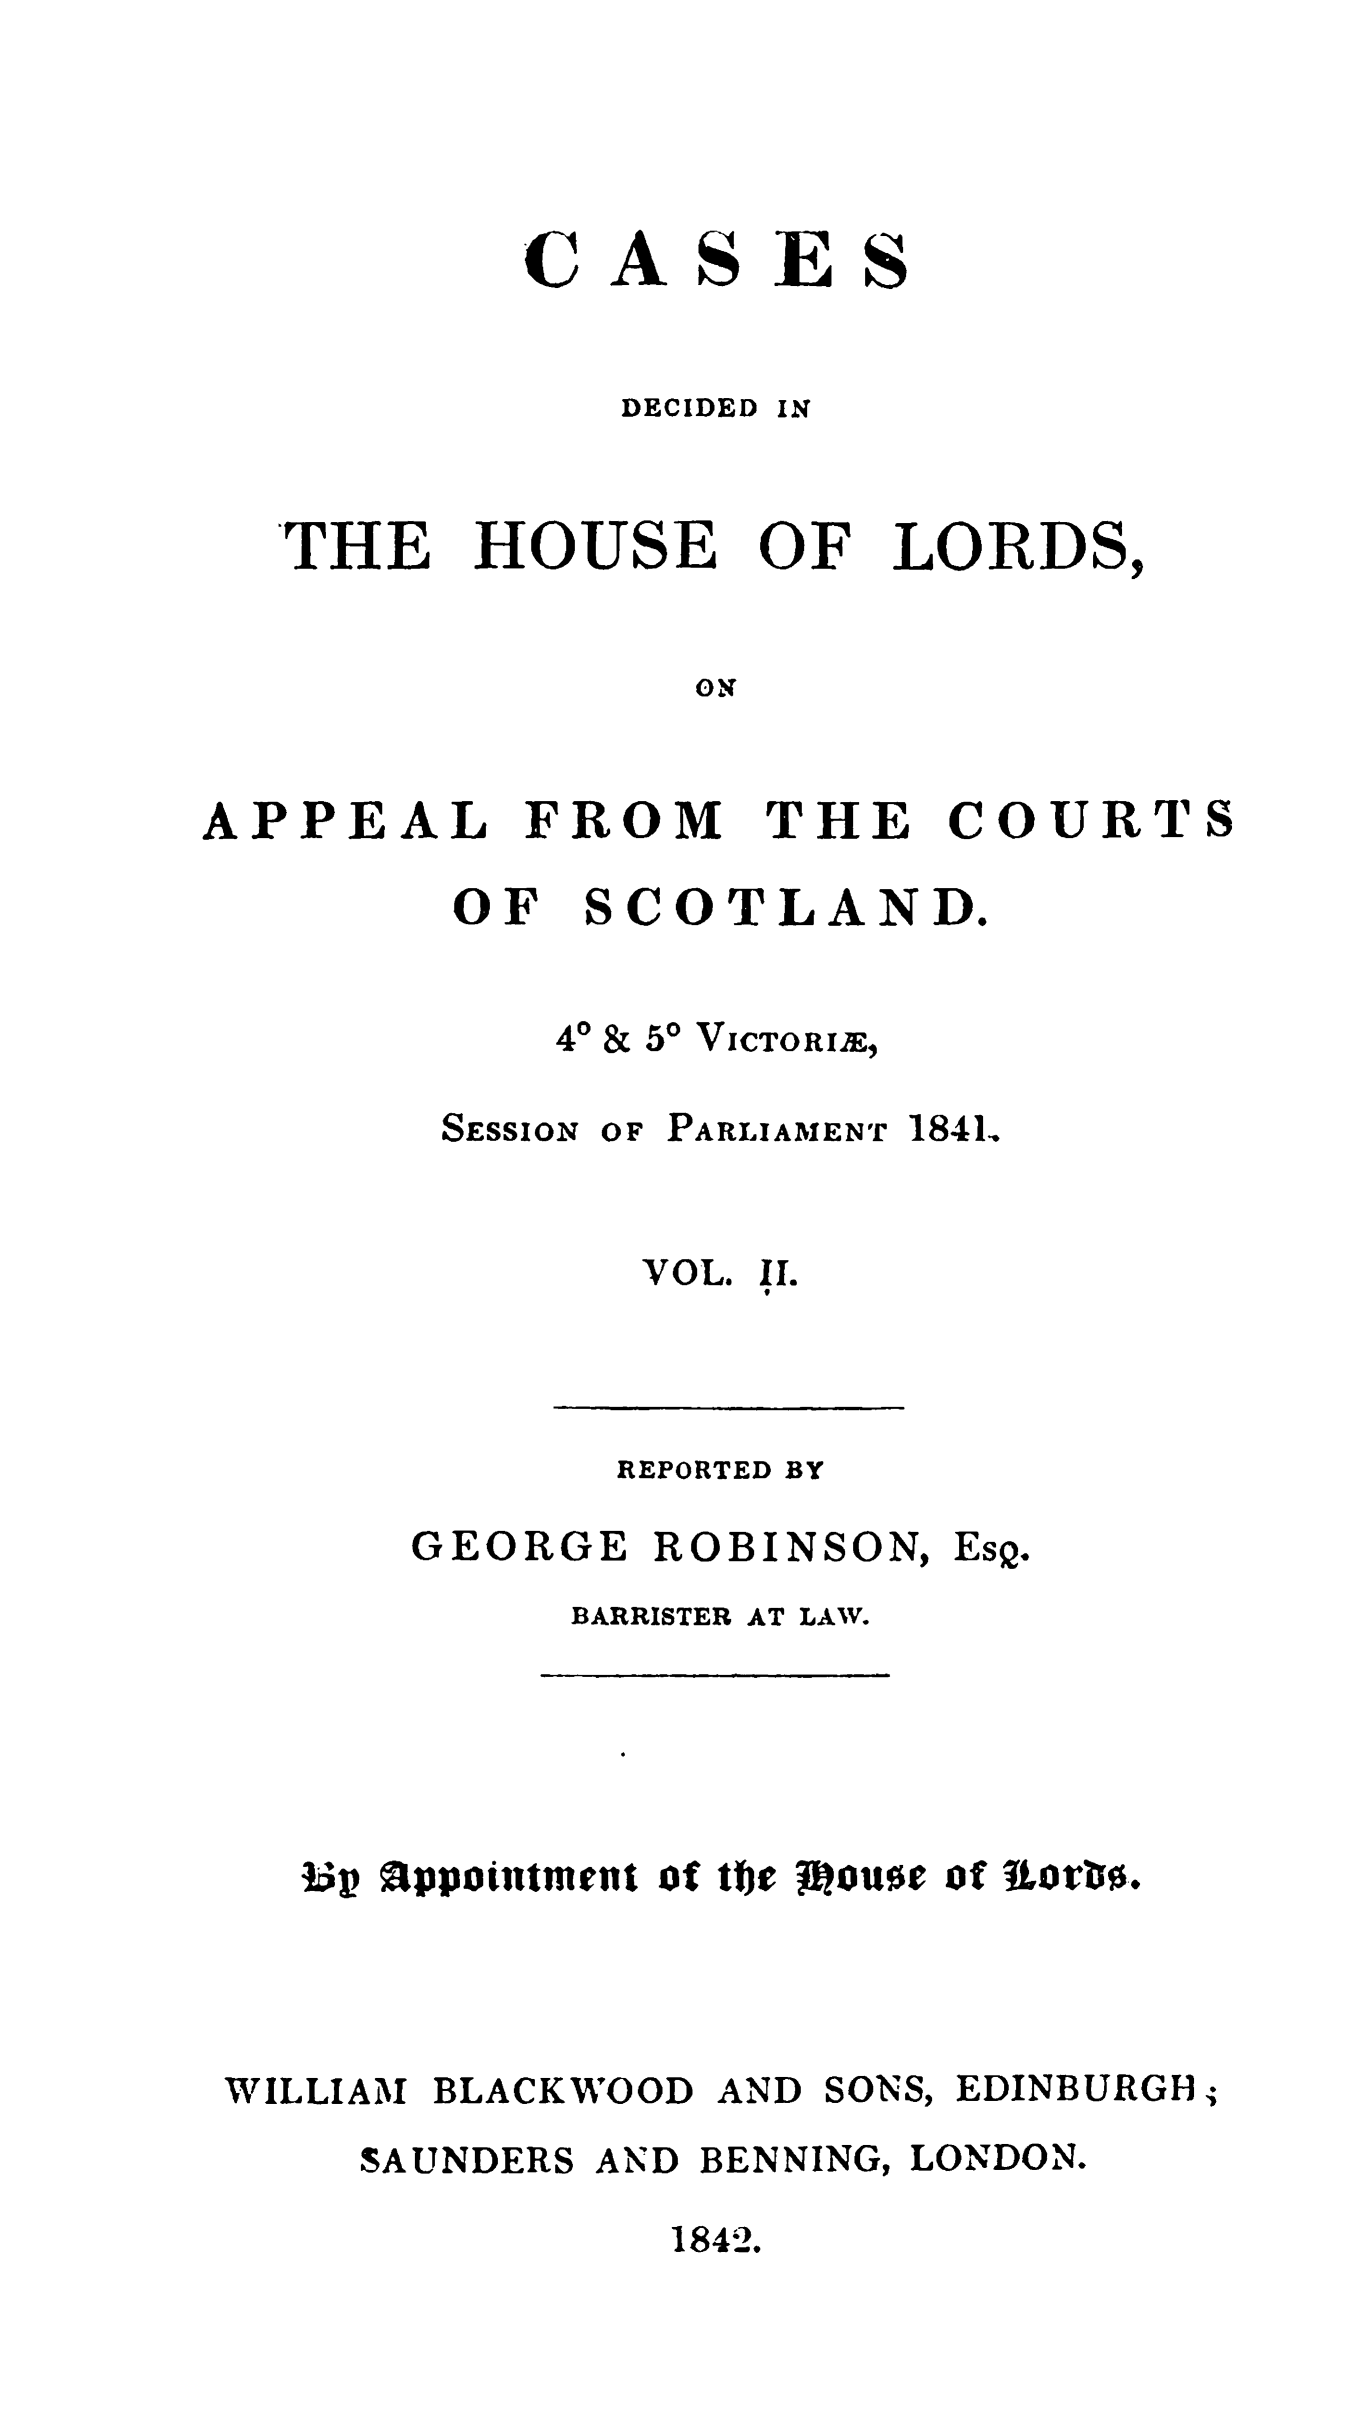 handle is hein.stair/cdholaps0002 and id is 1 raw text is: 




AS


ES


DECIDED


THE


HOUSE


OF


LORDS,


ON


APPEAL


FROM


THE


COURT


OF


S


COTLAND.


&50 VICTORIE,


SESSION


OF PARLIAMENT


1841.


VOL*


II.


REPORTED BY


GEORGE ROBINSON,


EsQ.


BARRISTER AT LAW.


Up Tppoiutment o tfwth oust o  uort0.


WILLIAM BLACKWOOD AND


SONS,


EDINBURGH;


SAUNDERS AND BENNING, LONDON.
           1842.


C


IN


S


40


